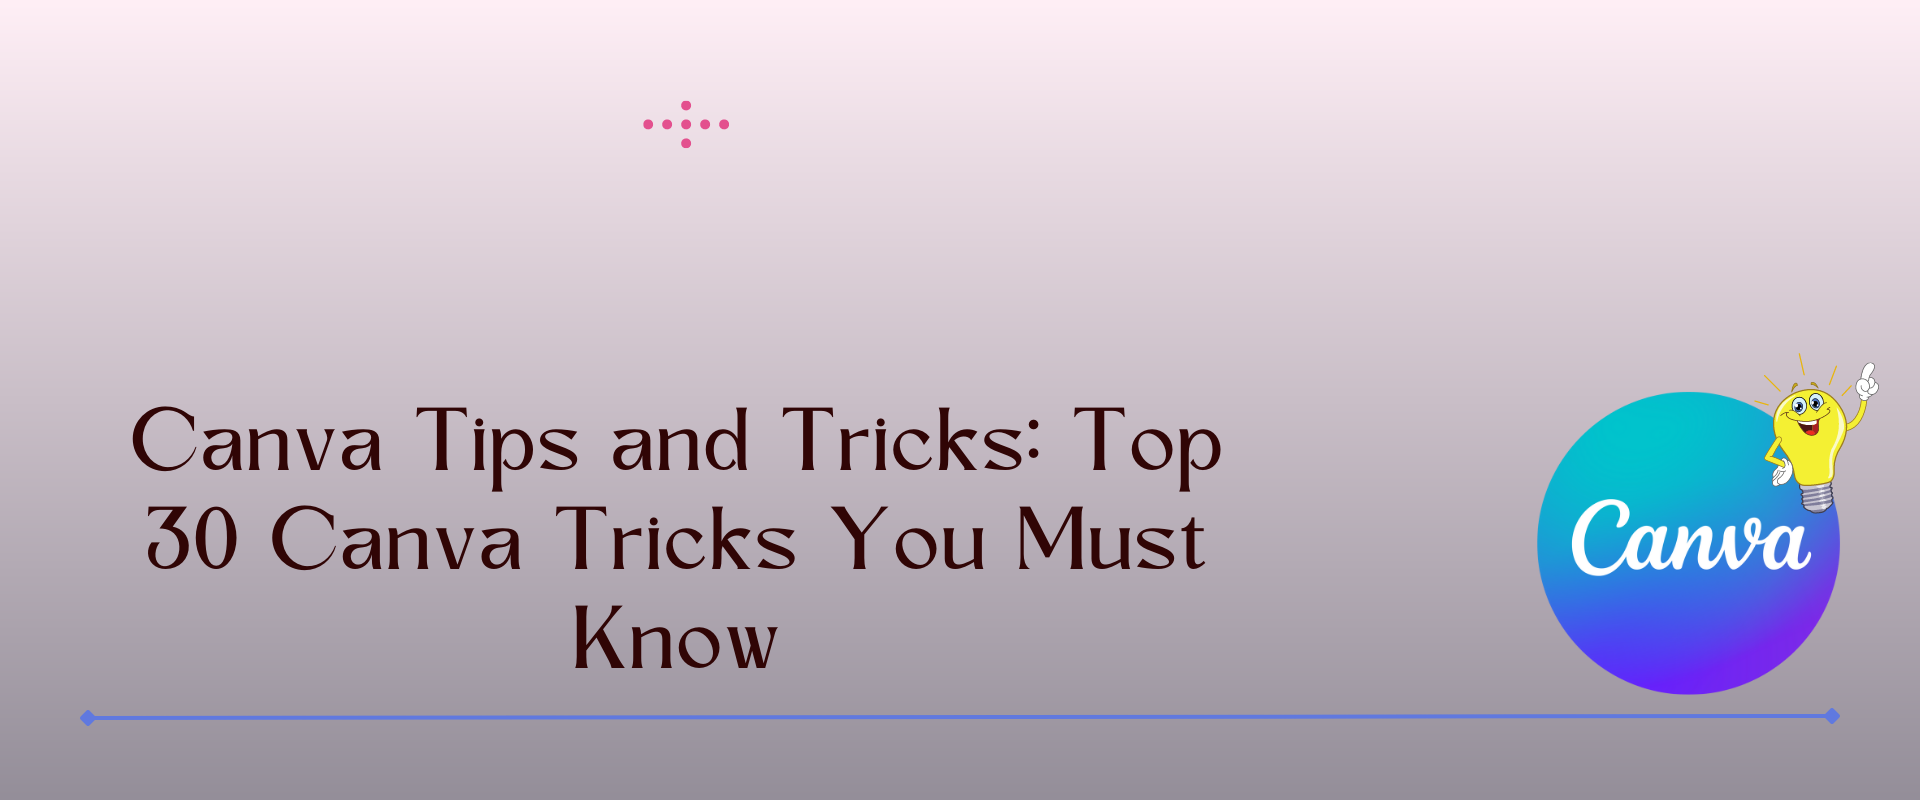 Canva Tips and Tricks: Top 30 Canva Tricks You Must Know